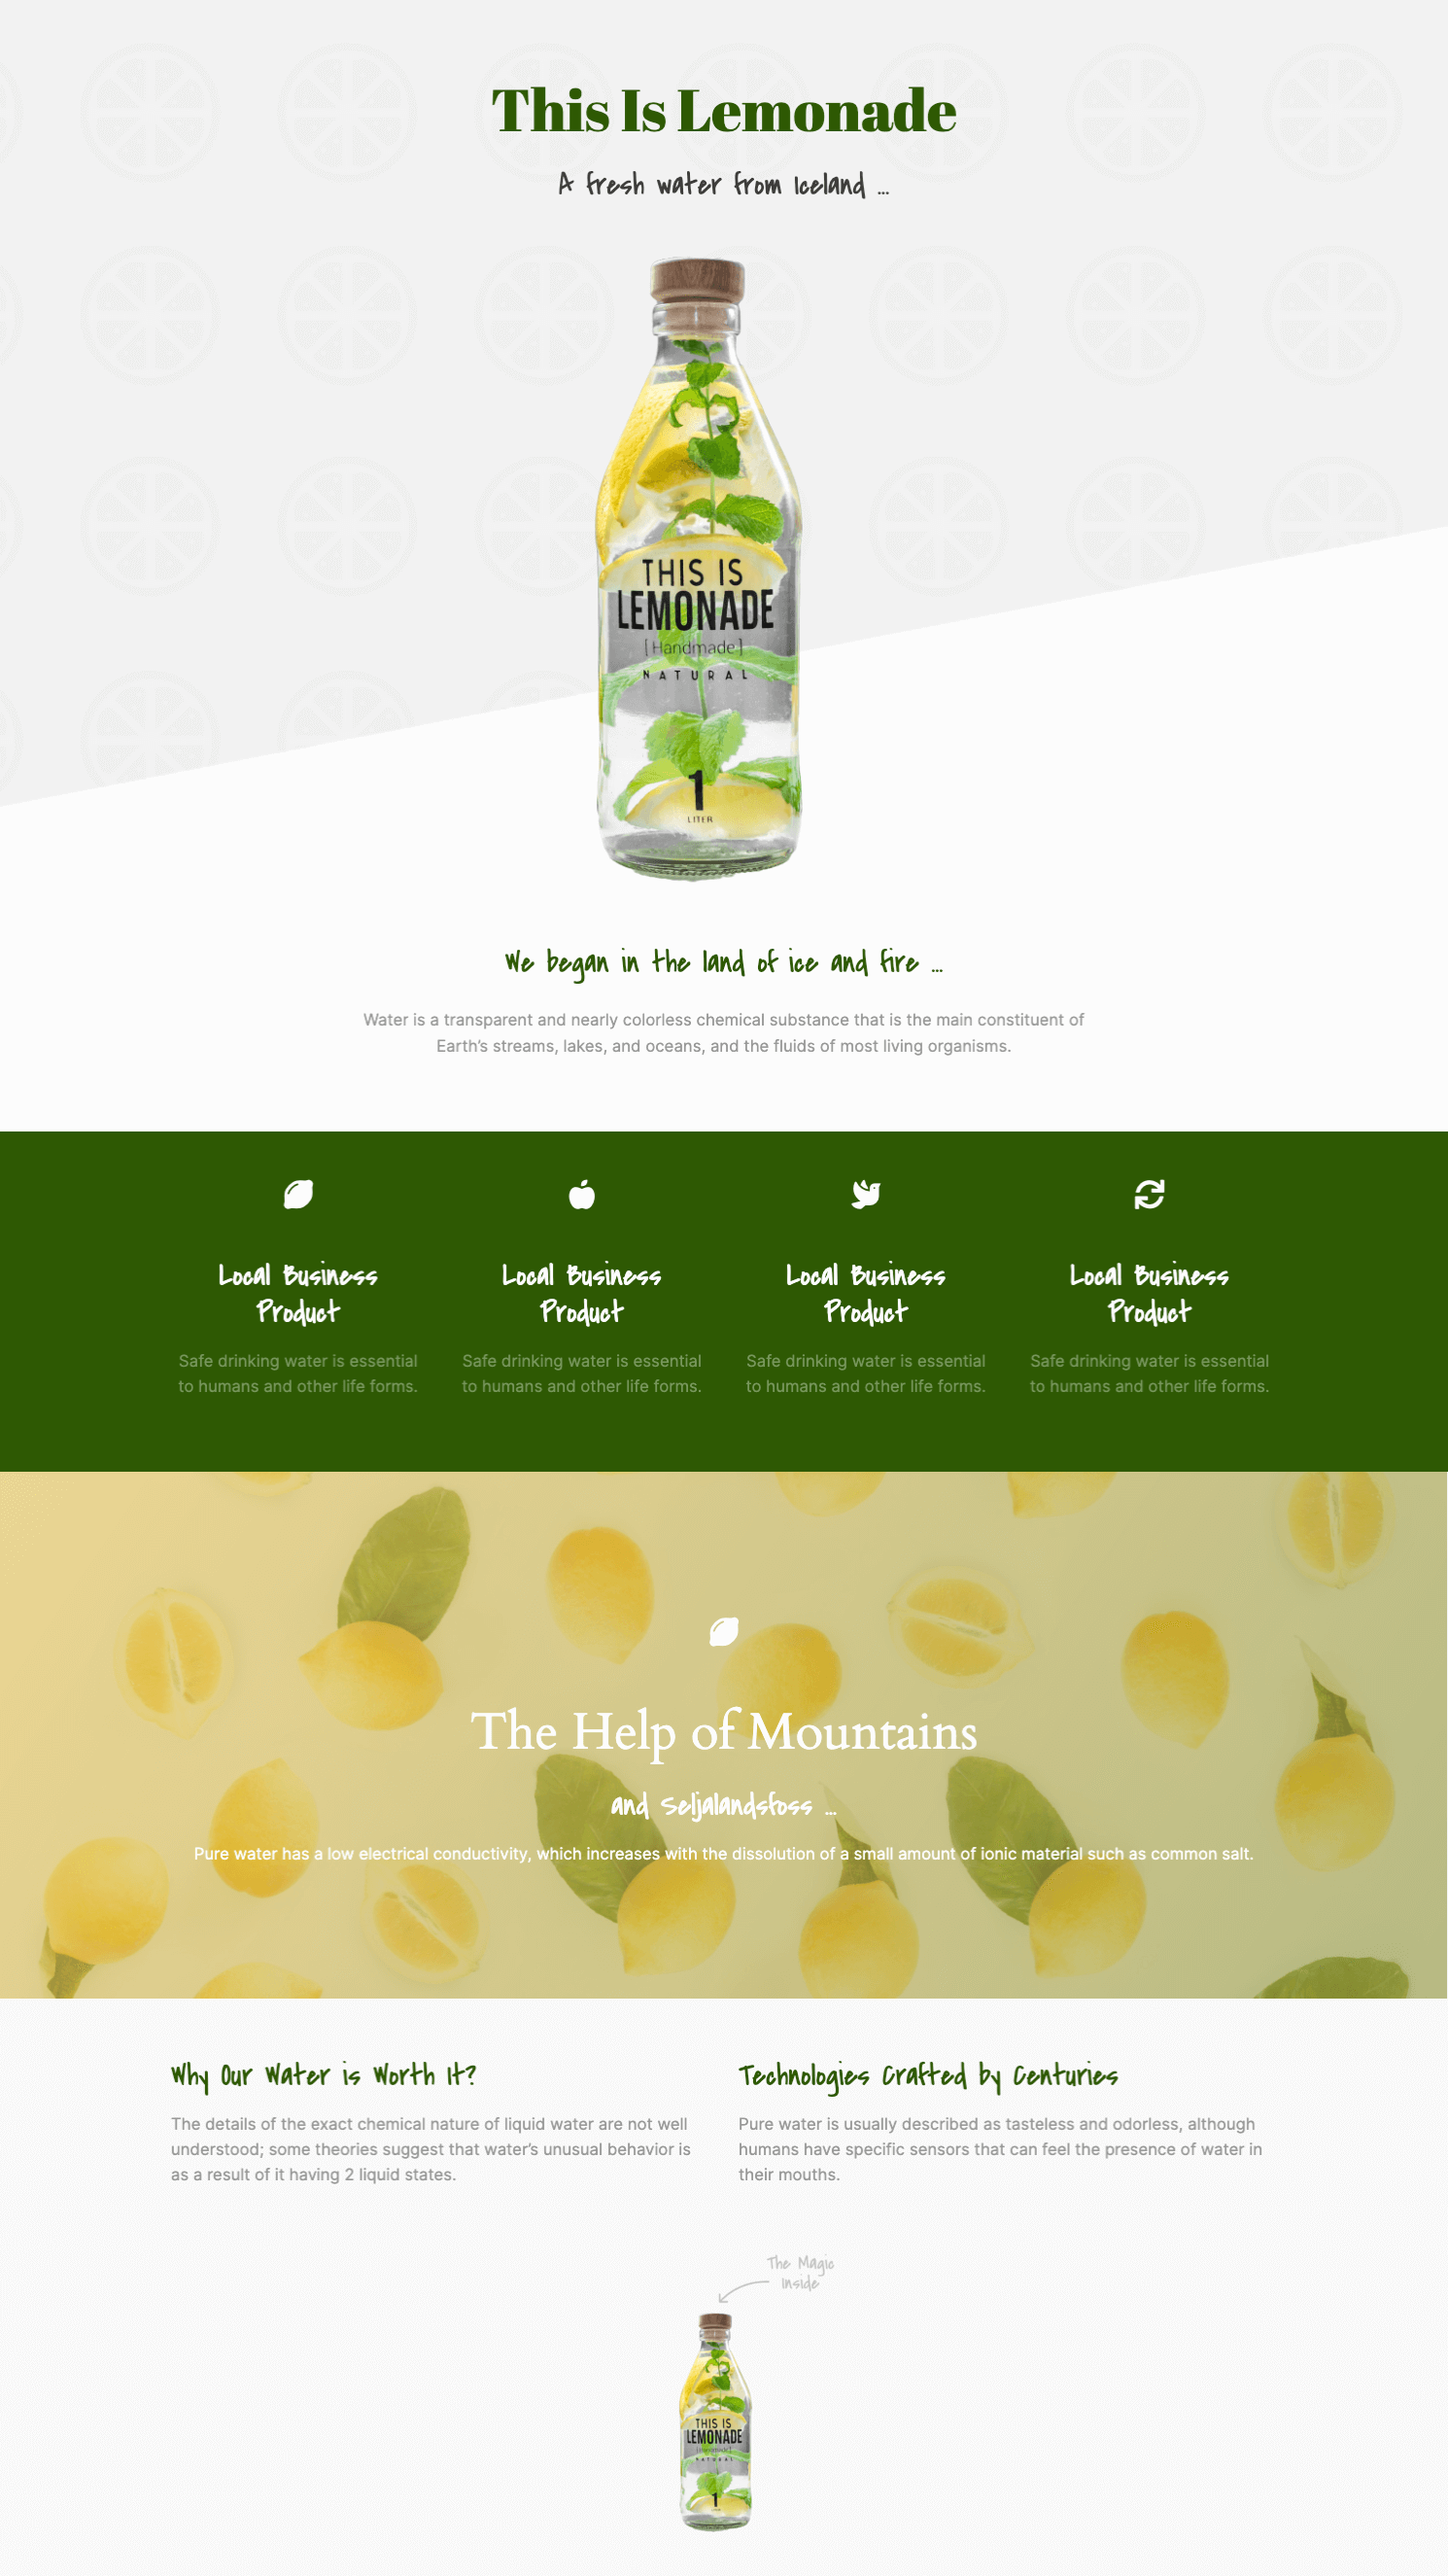 Full landing page design created in WPBakery Page Builder